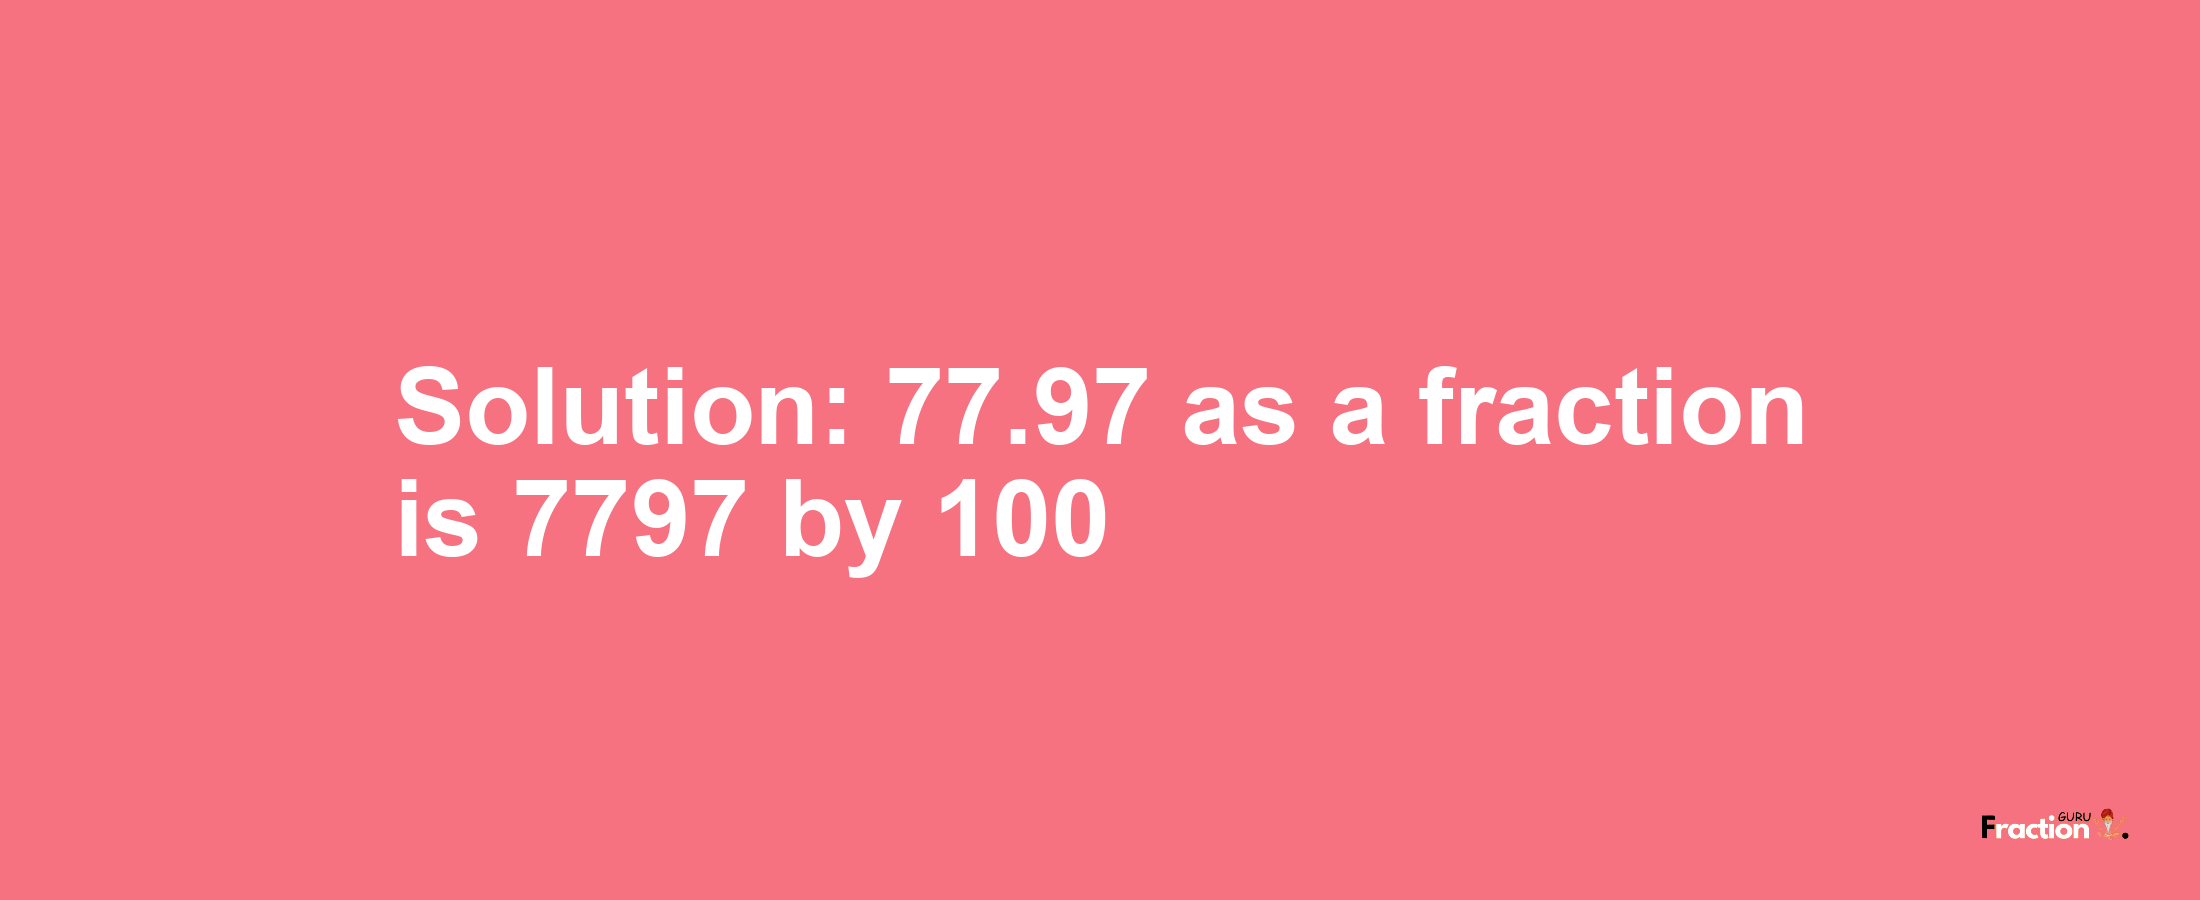 Solution:77.97 as a fraction is 7797/100